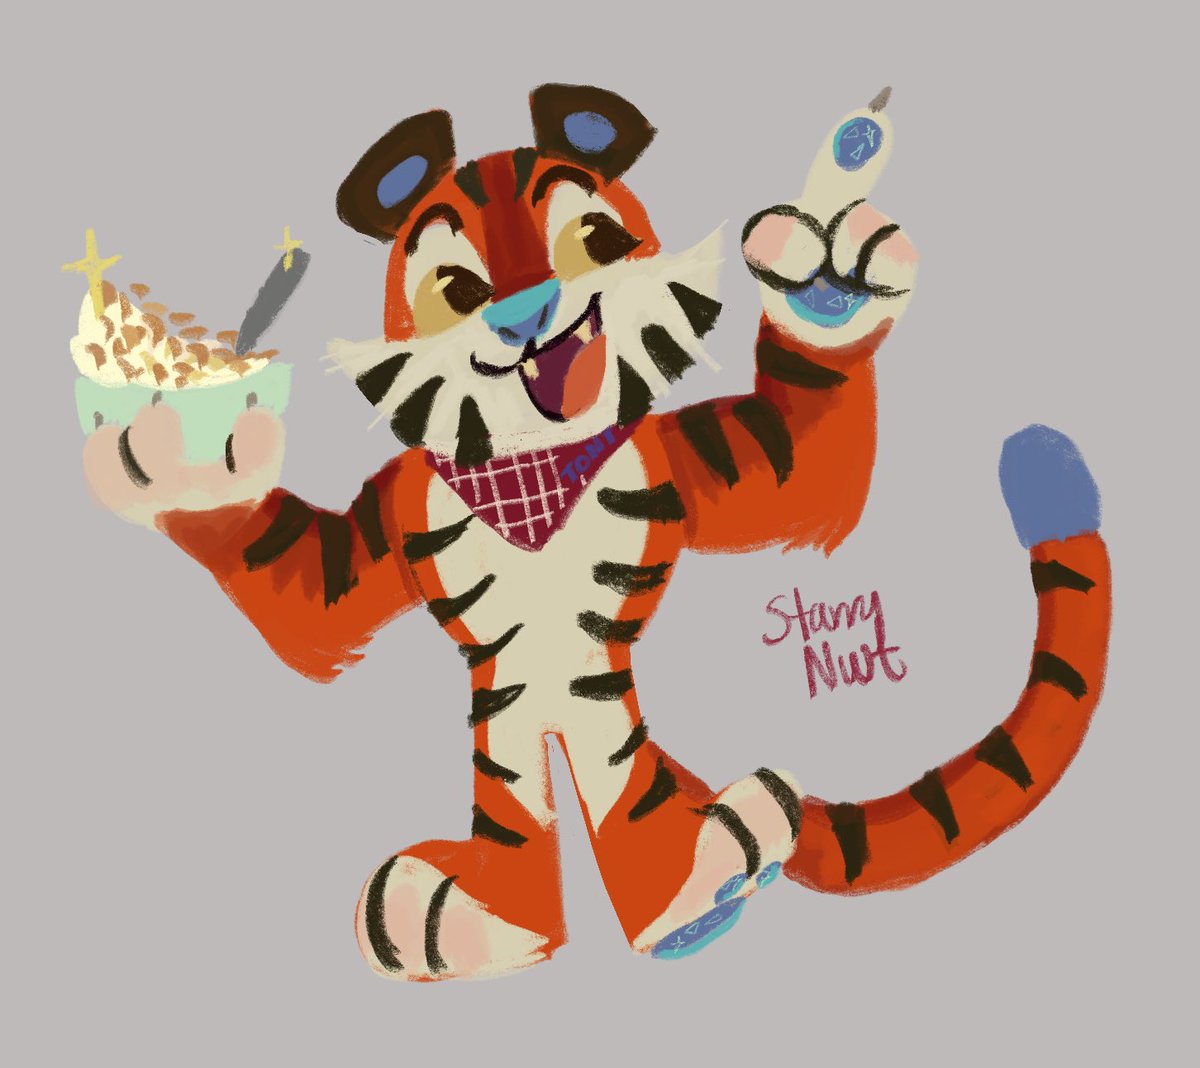 Tony the Tiger, he’s great.